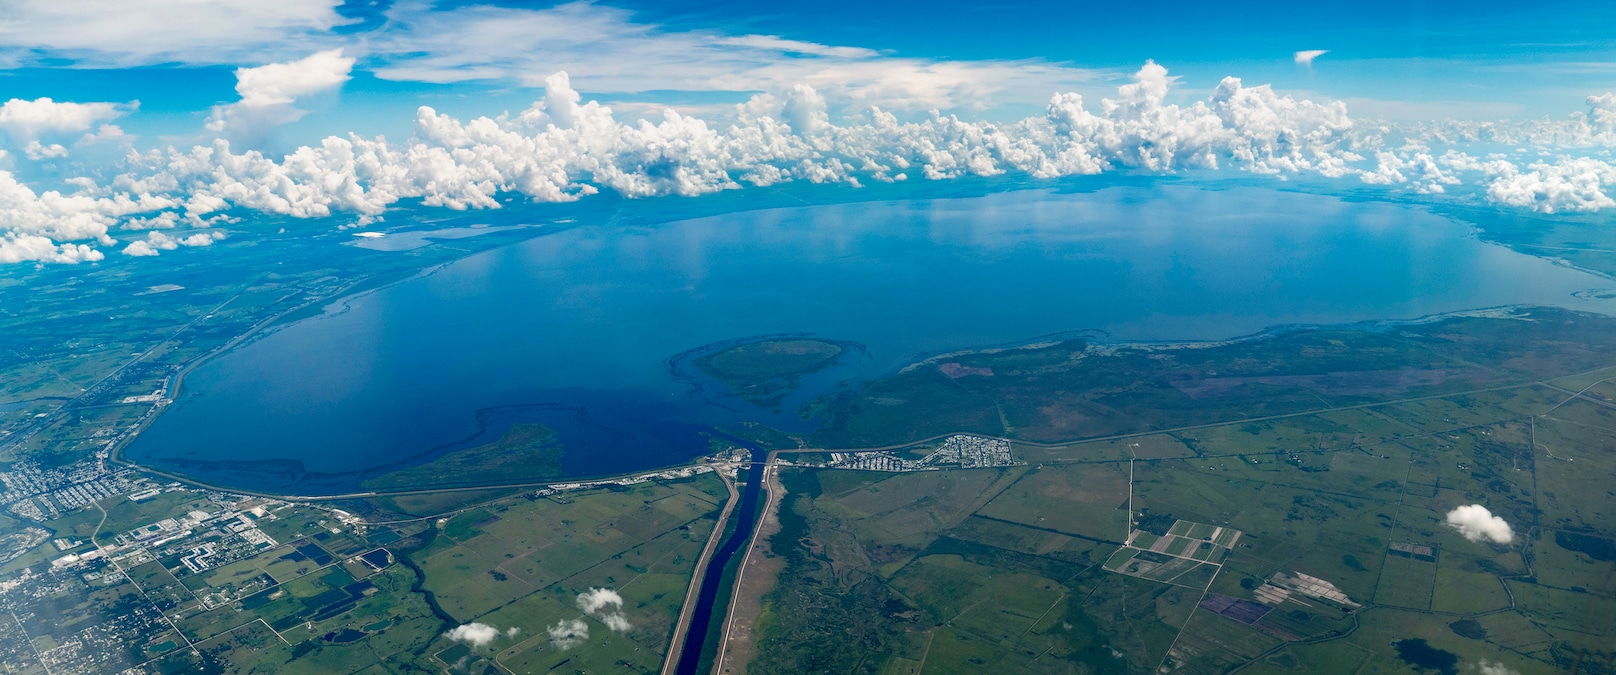 Aerial view of Lake Okeechobee, the largest freshwater lake in Florida